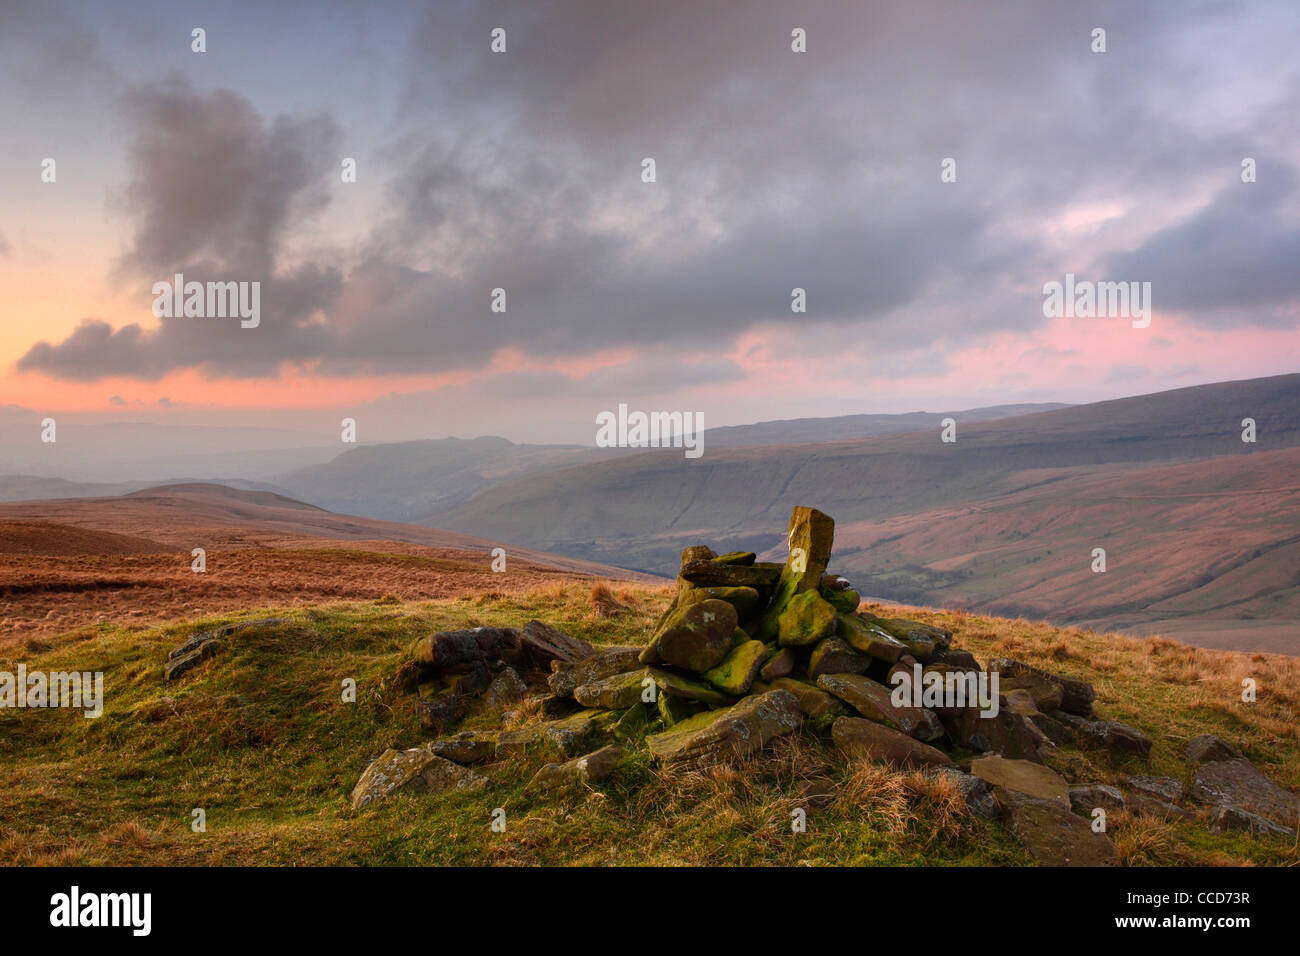 Sunrise in Fforest Fawr, Brecon Beacons, Wales, UK Stock Photo